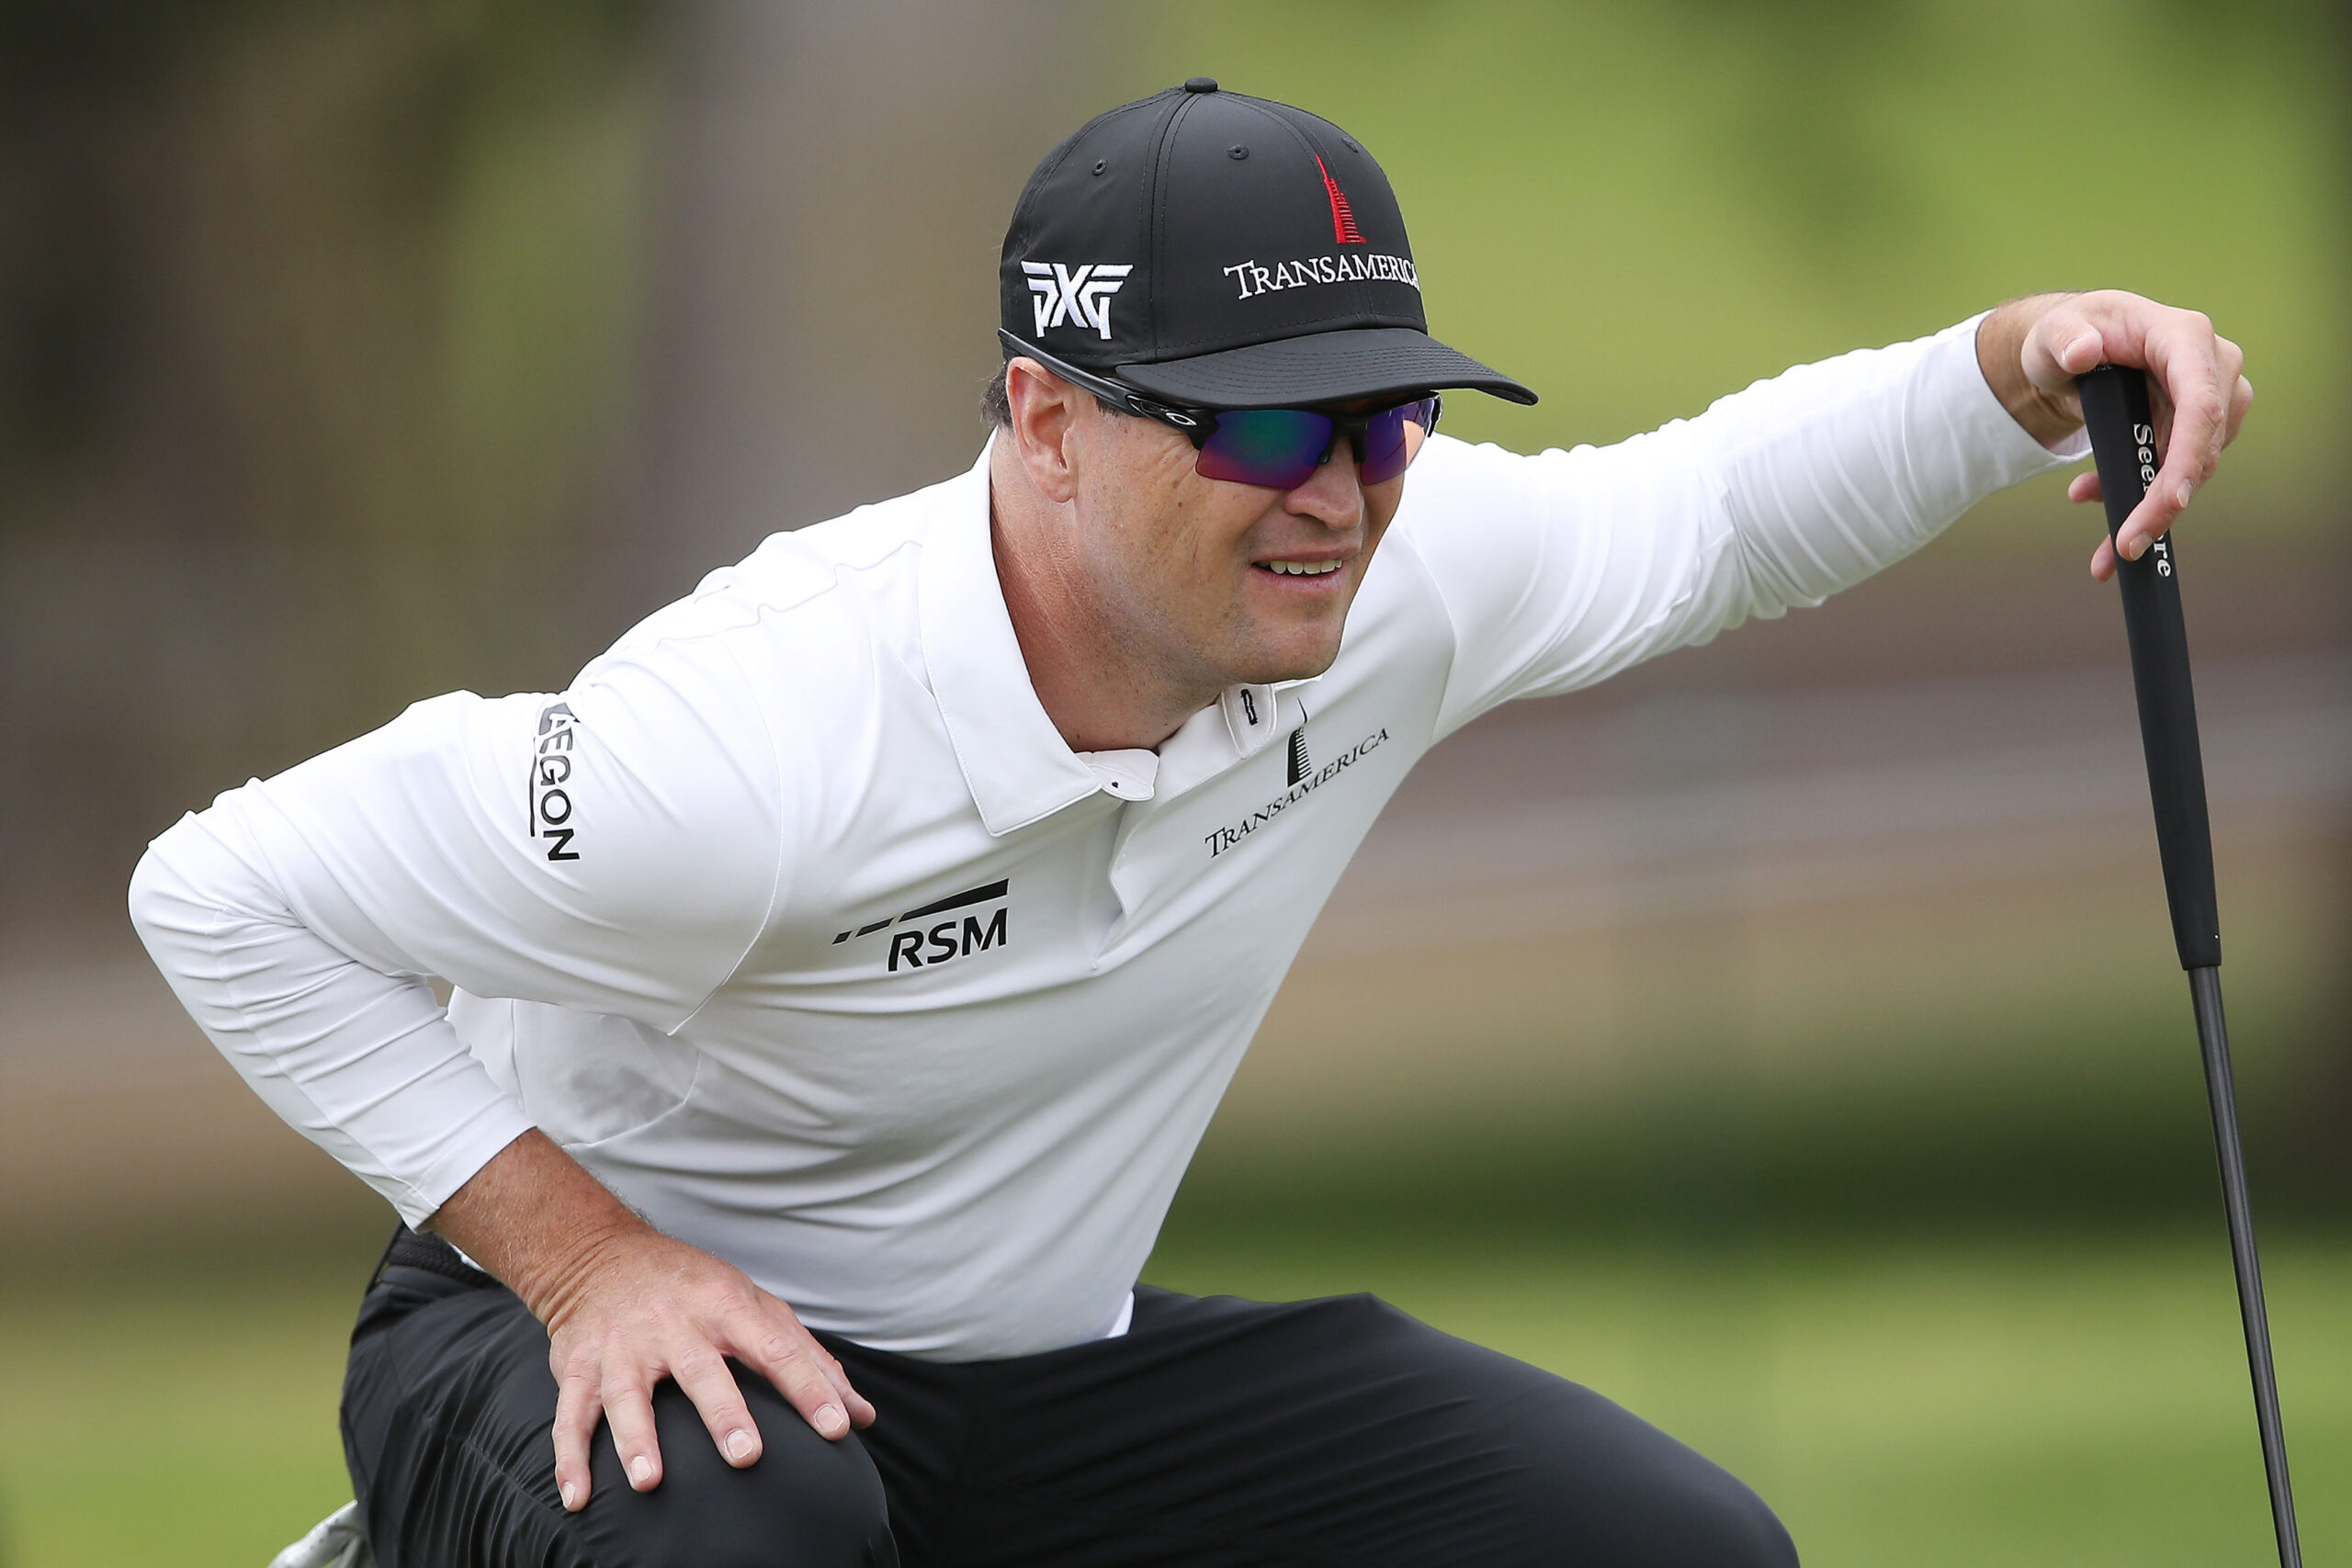 Zach Johnson made a mistake the Masters 2019